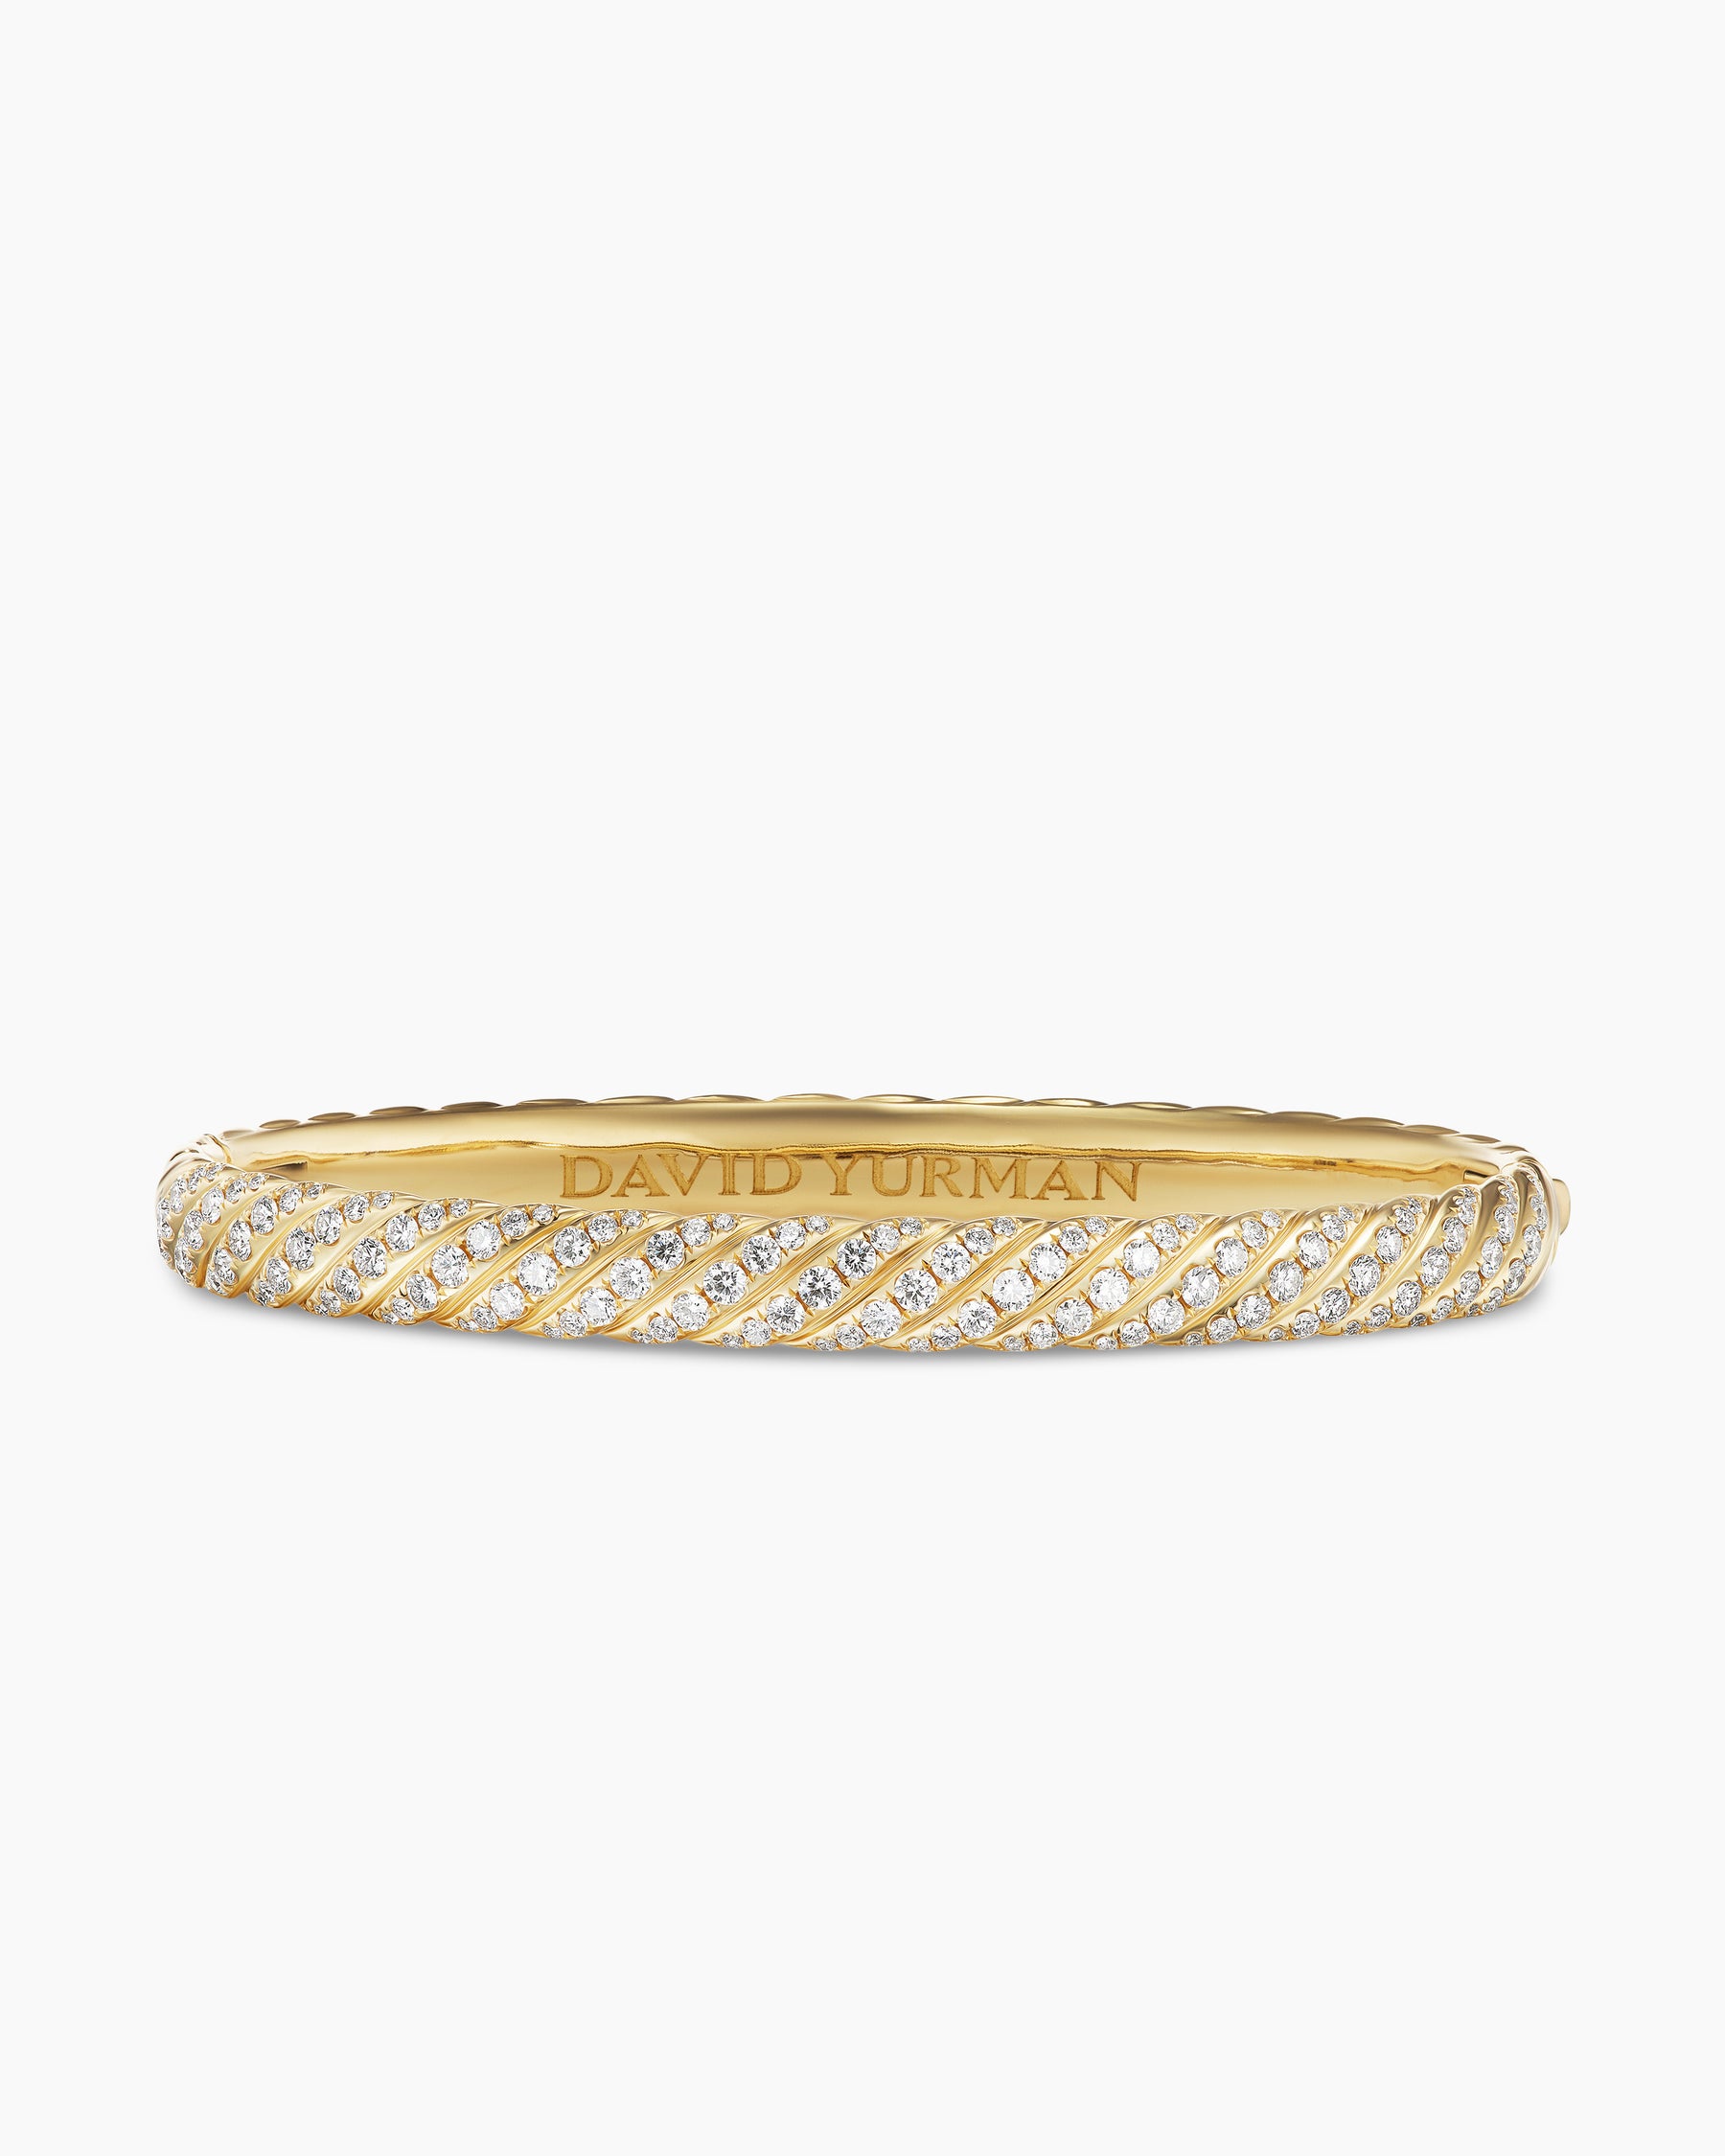 Sculpted Cable Bangle Bracelet in 18k Yellow Gold With Diamonds, 6.2mm